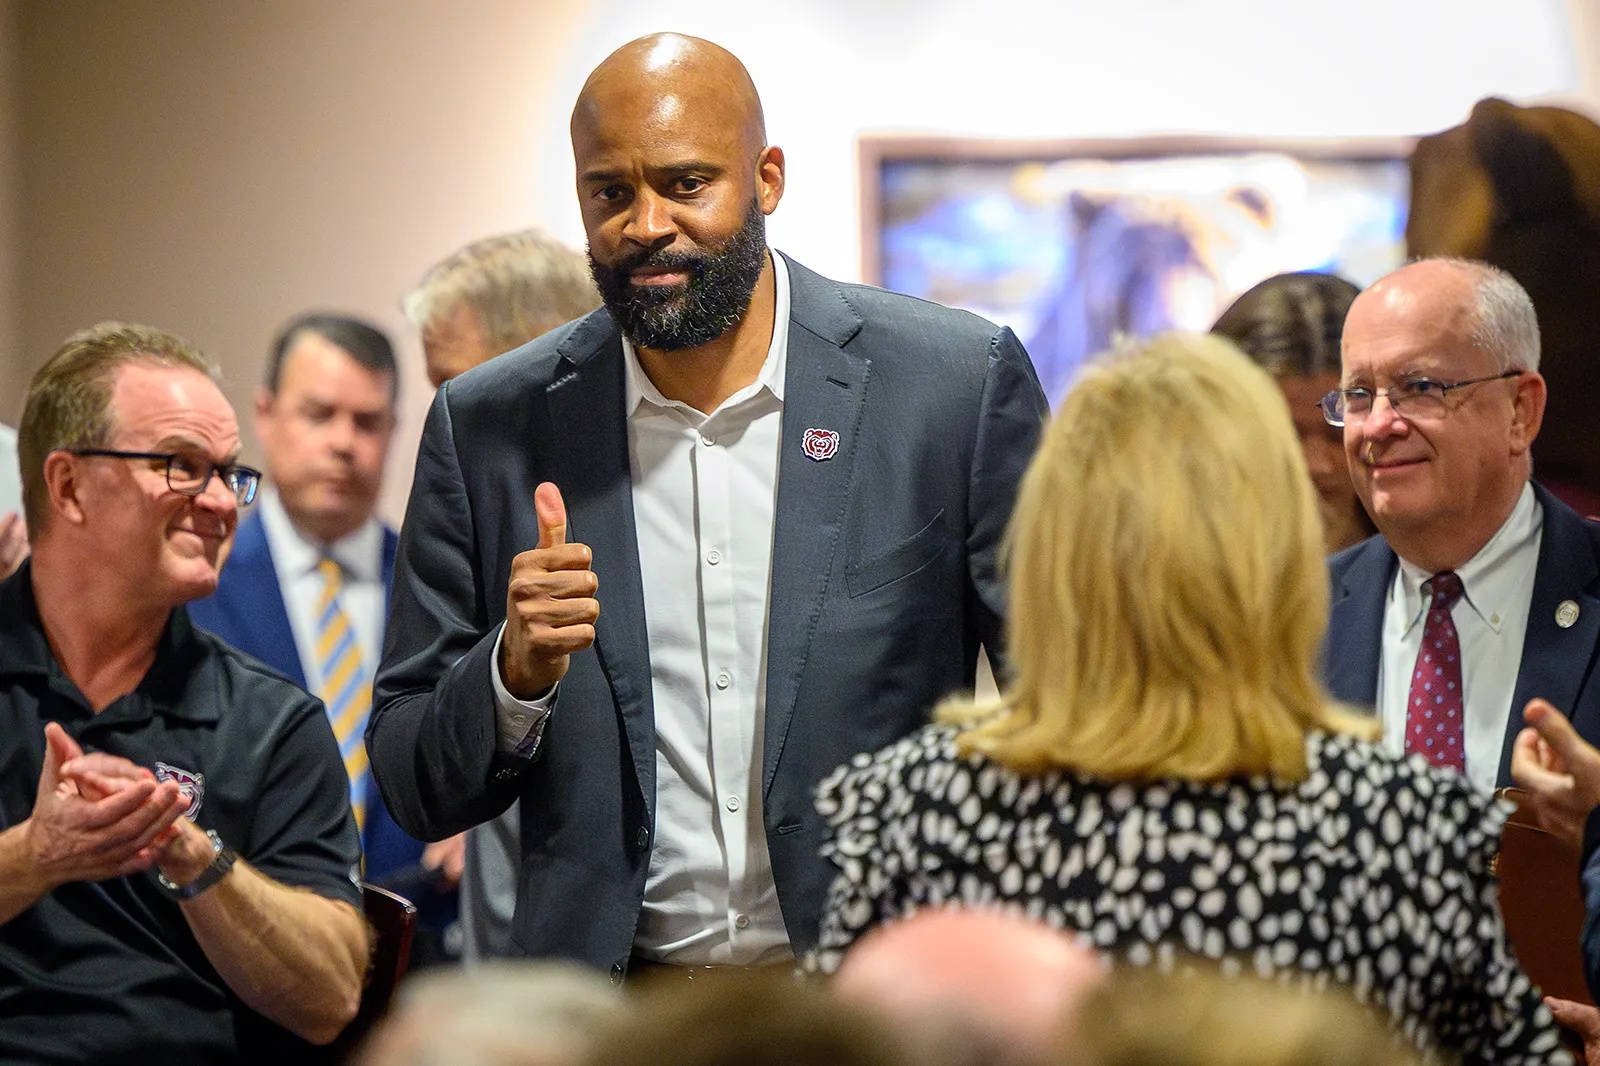 Cuonzo Martin gives a thumbs-up as he walks into the press conference announcing his hiring as Missouri State University's men's basketball coach.